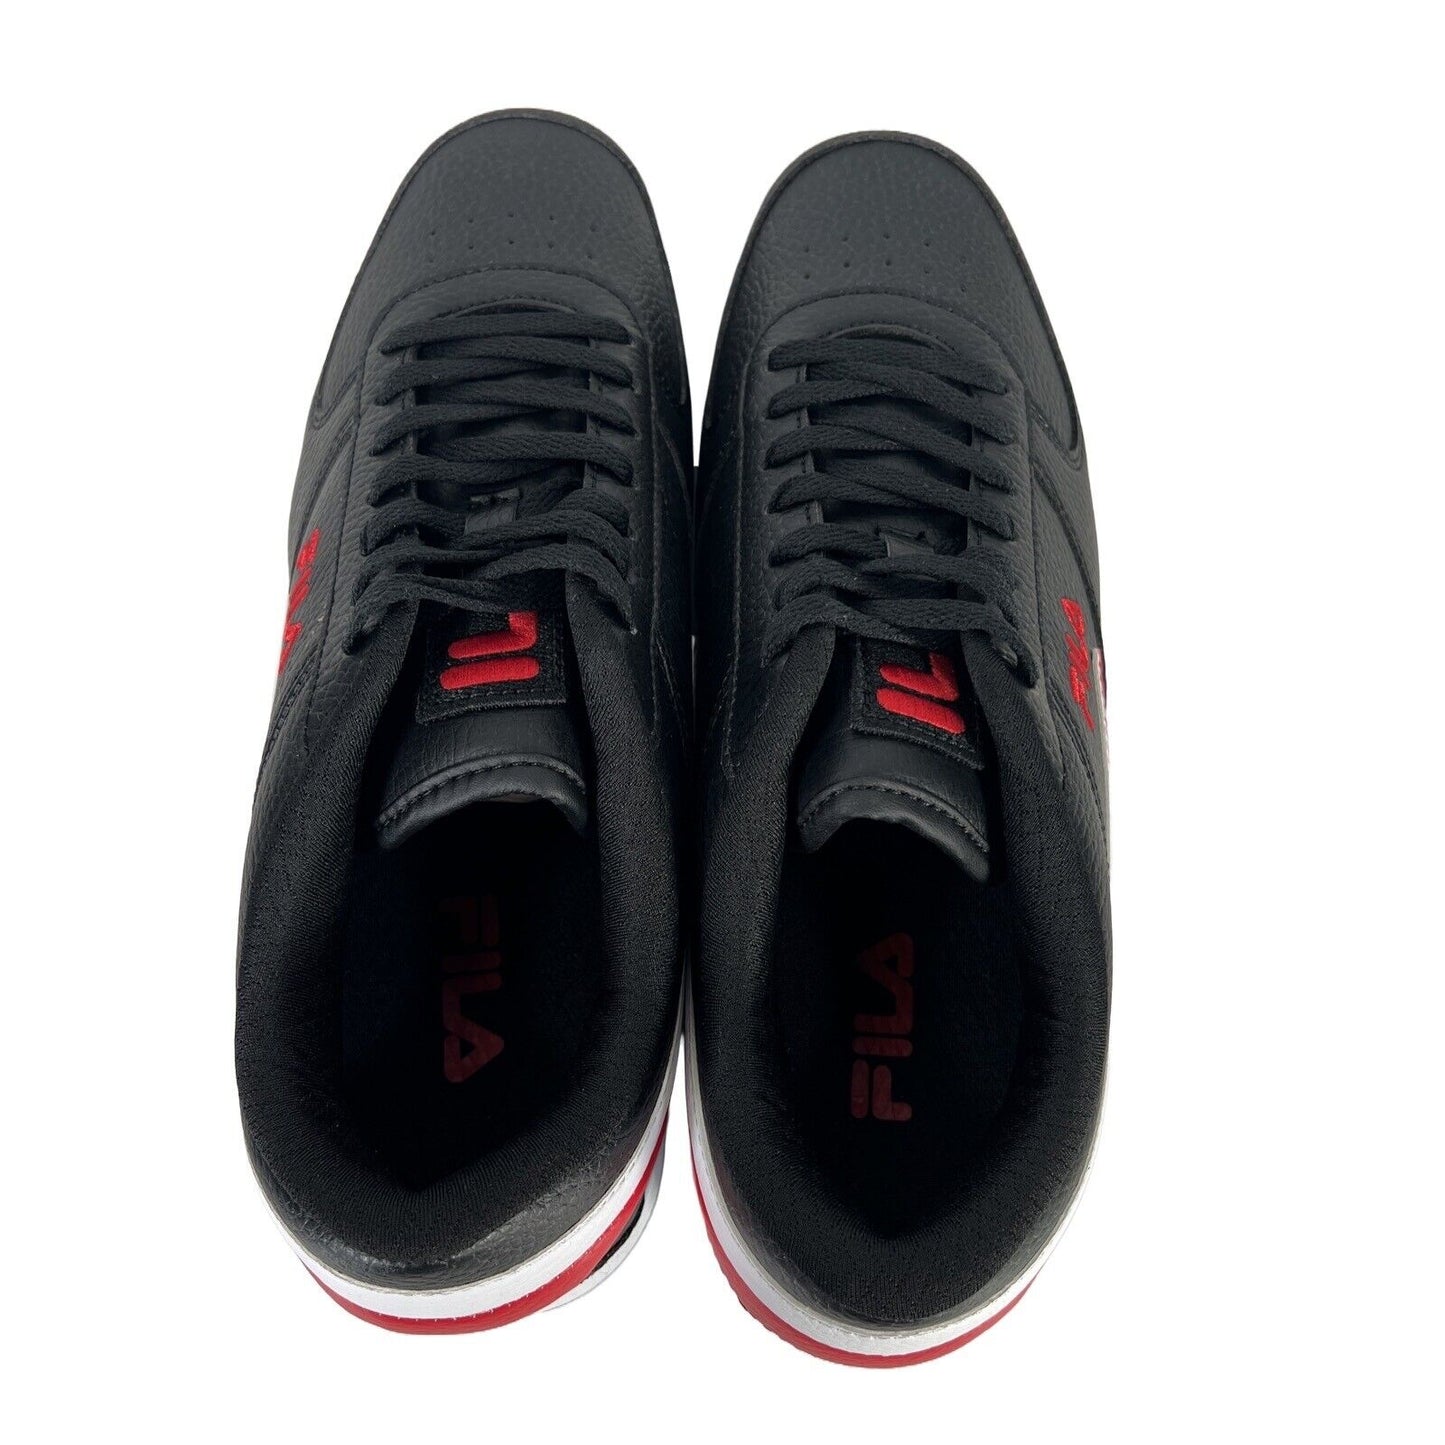 NEW Fila Men's Black/Red A-Low Athletic Sneakers - 10